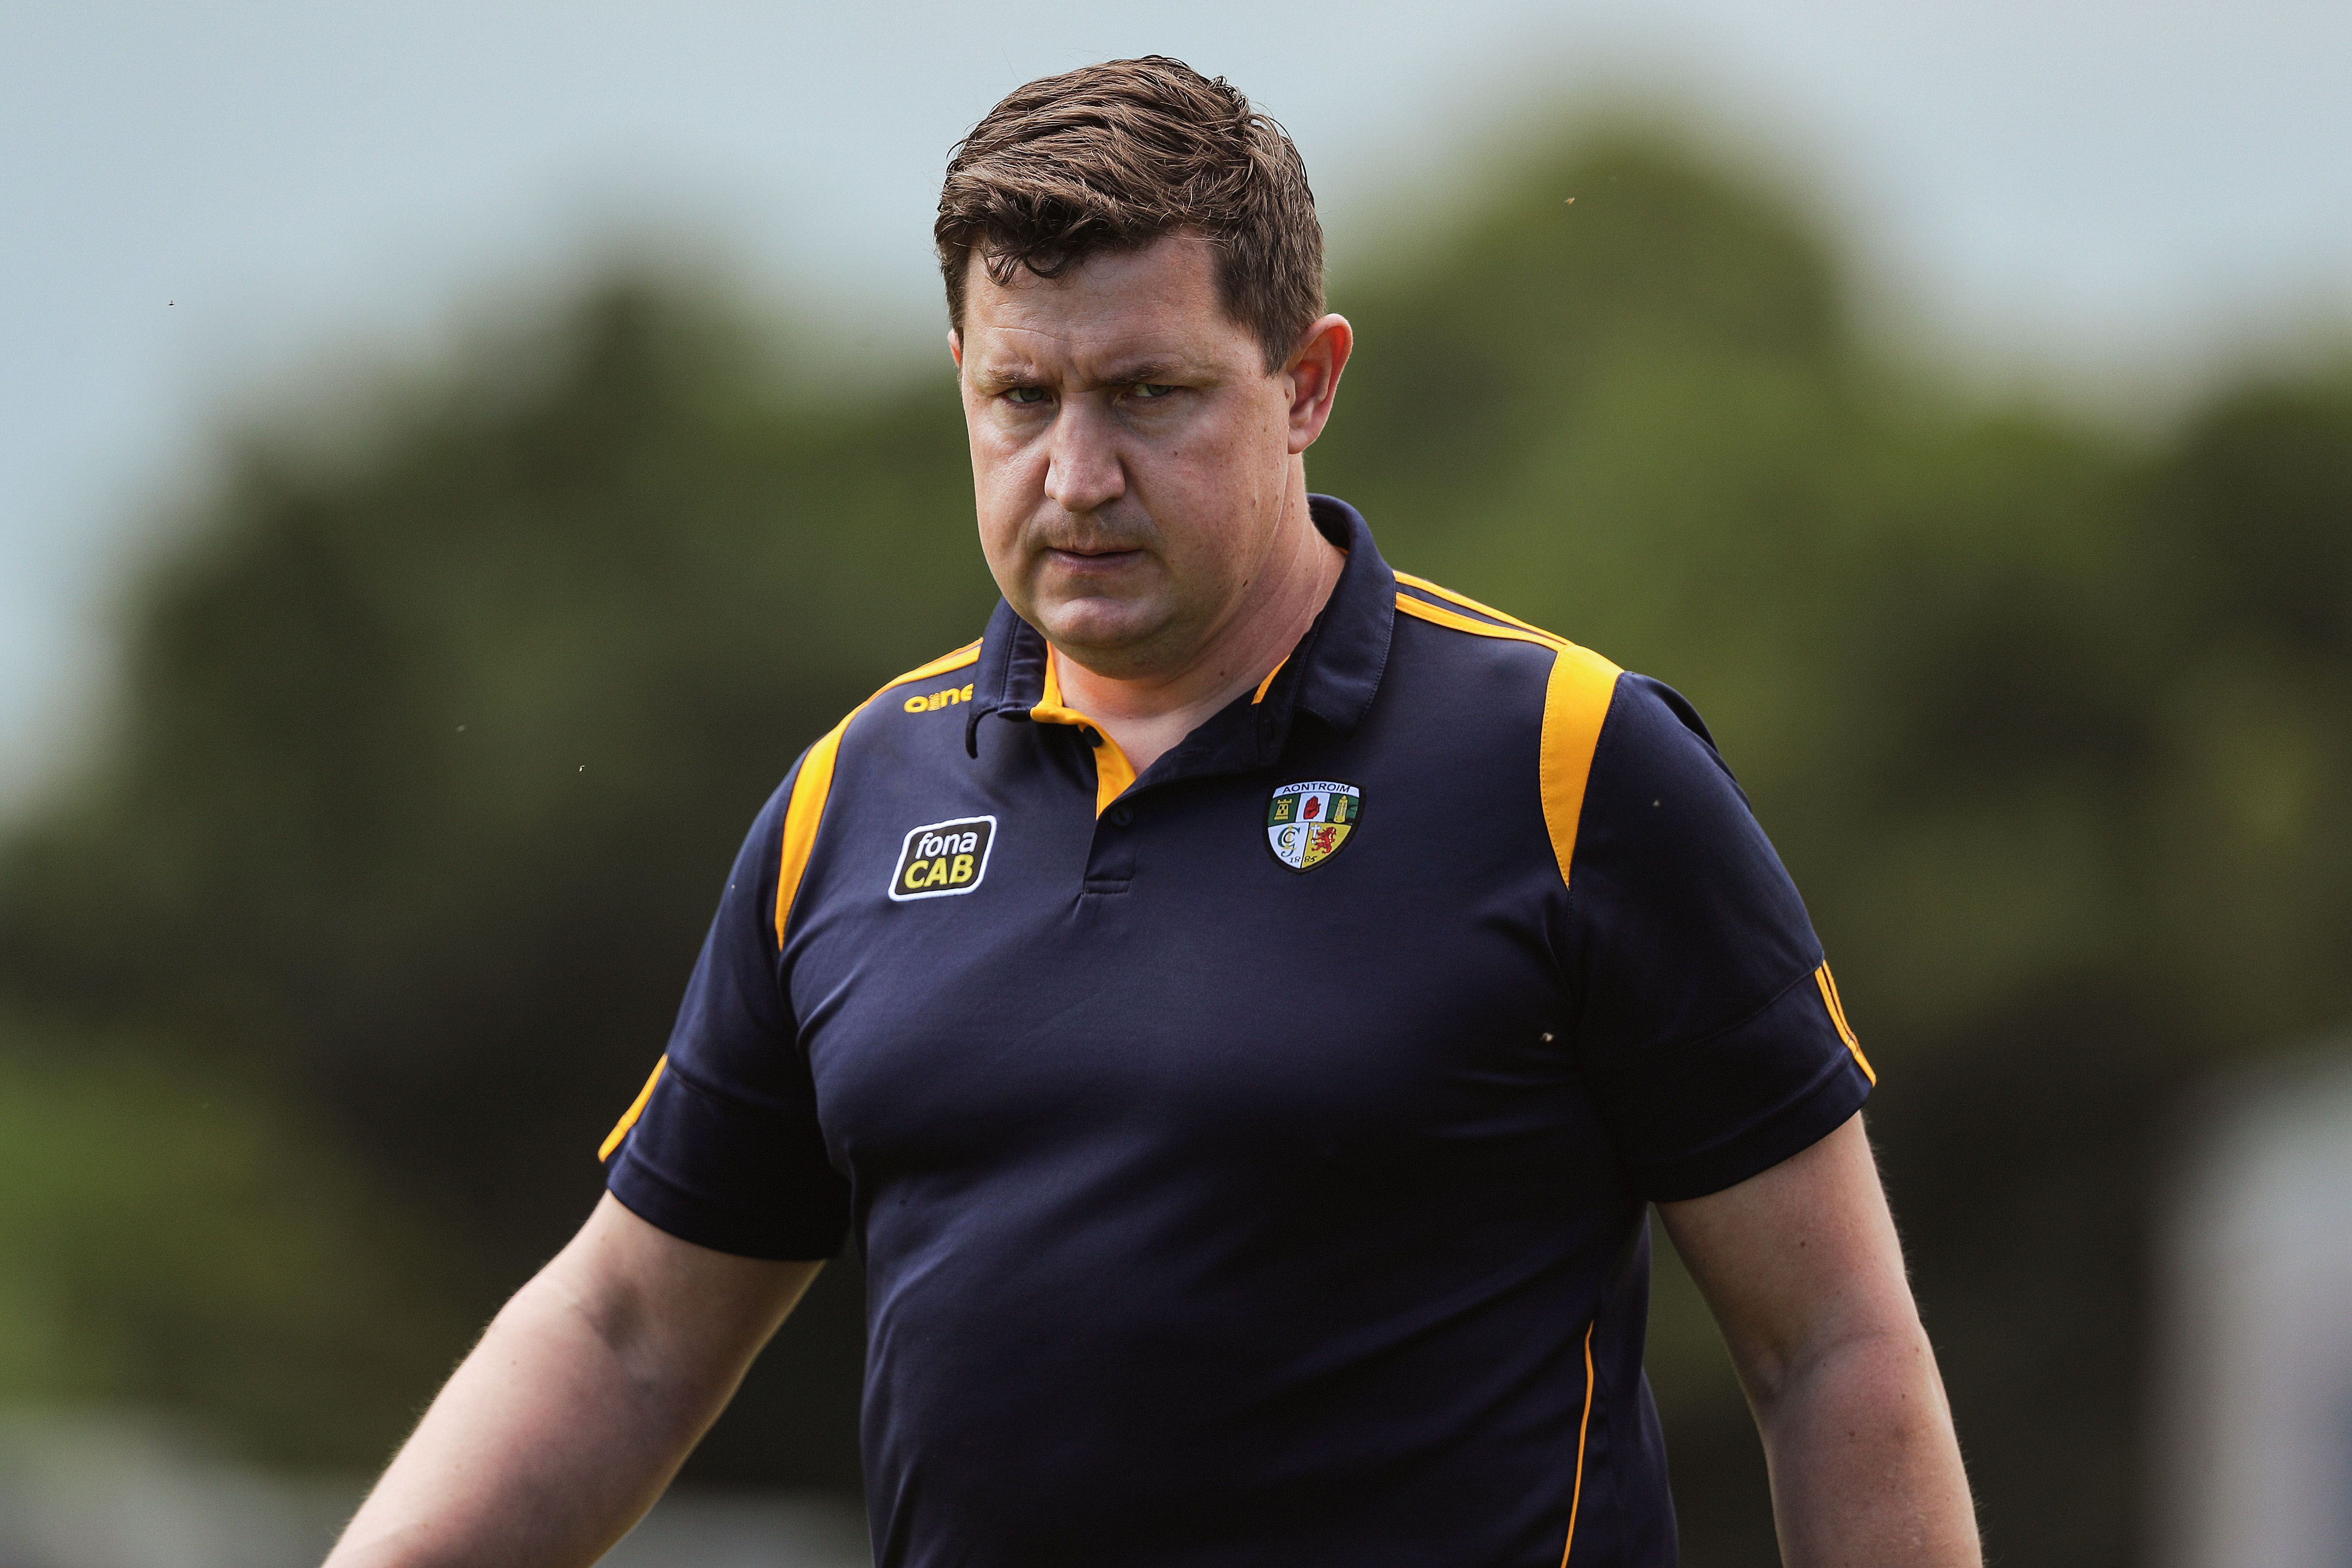 Antrim manager Darren Gleeson insists exposure to top-level hurling and not relegation is the only way forward for his team